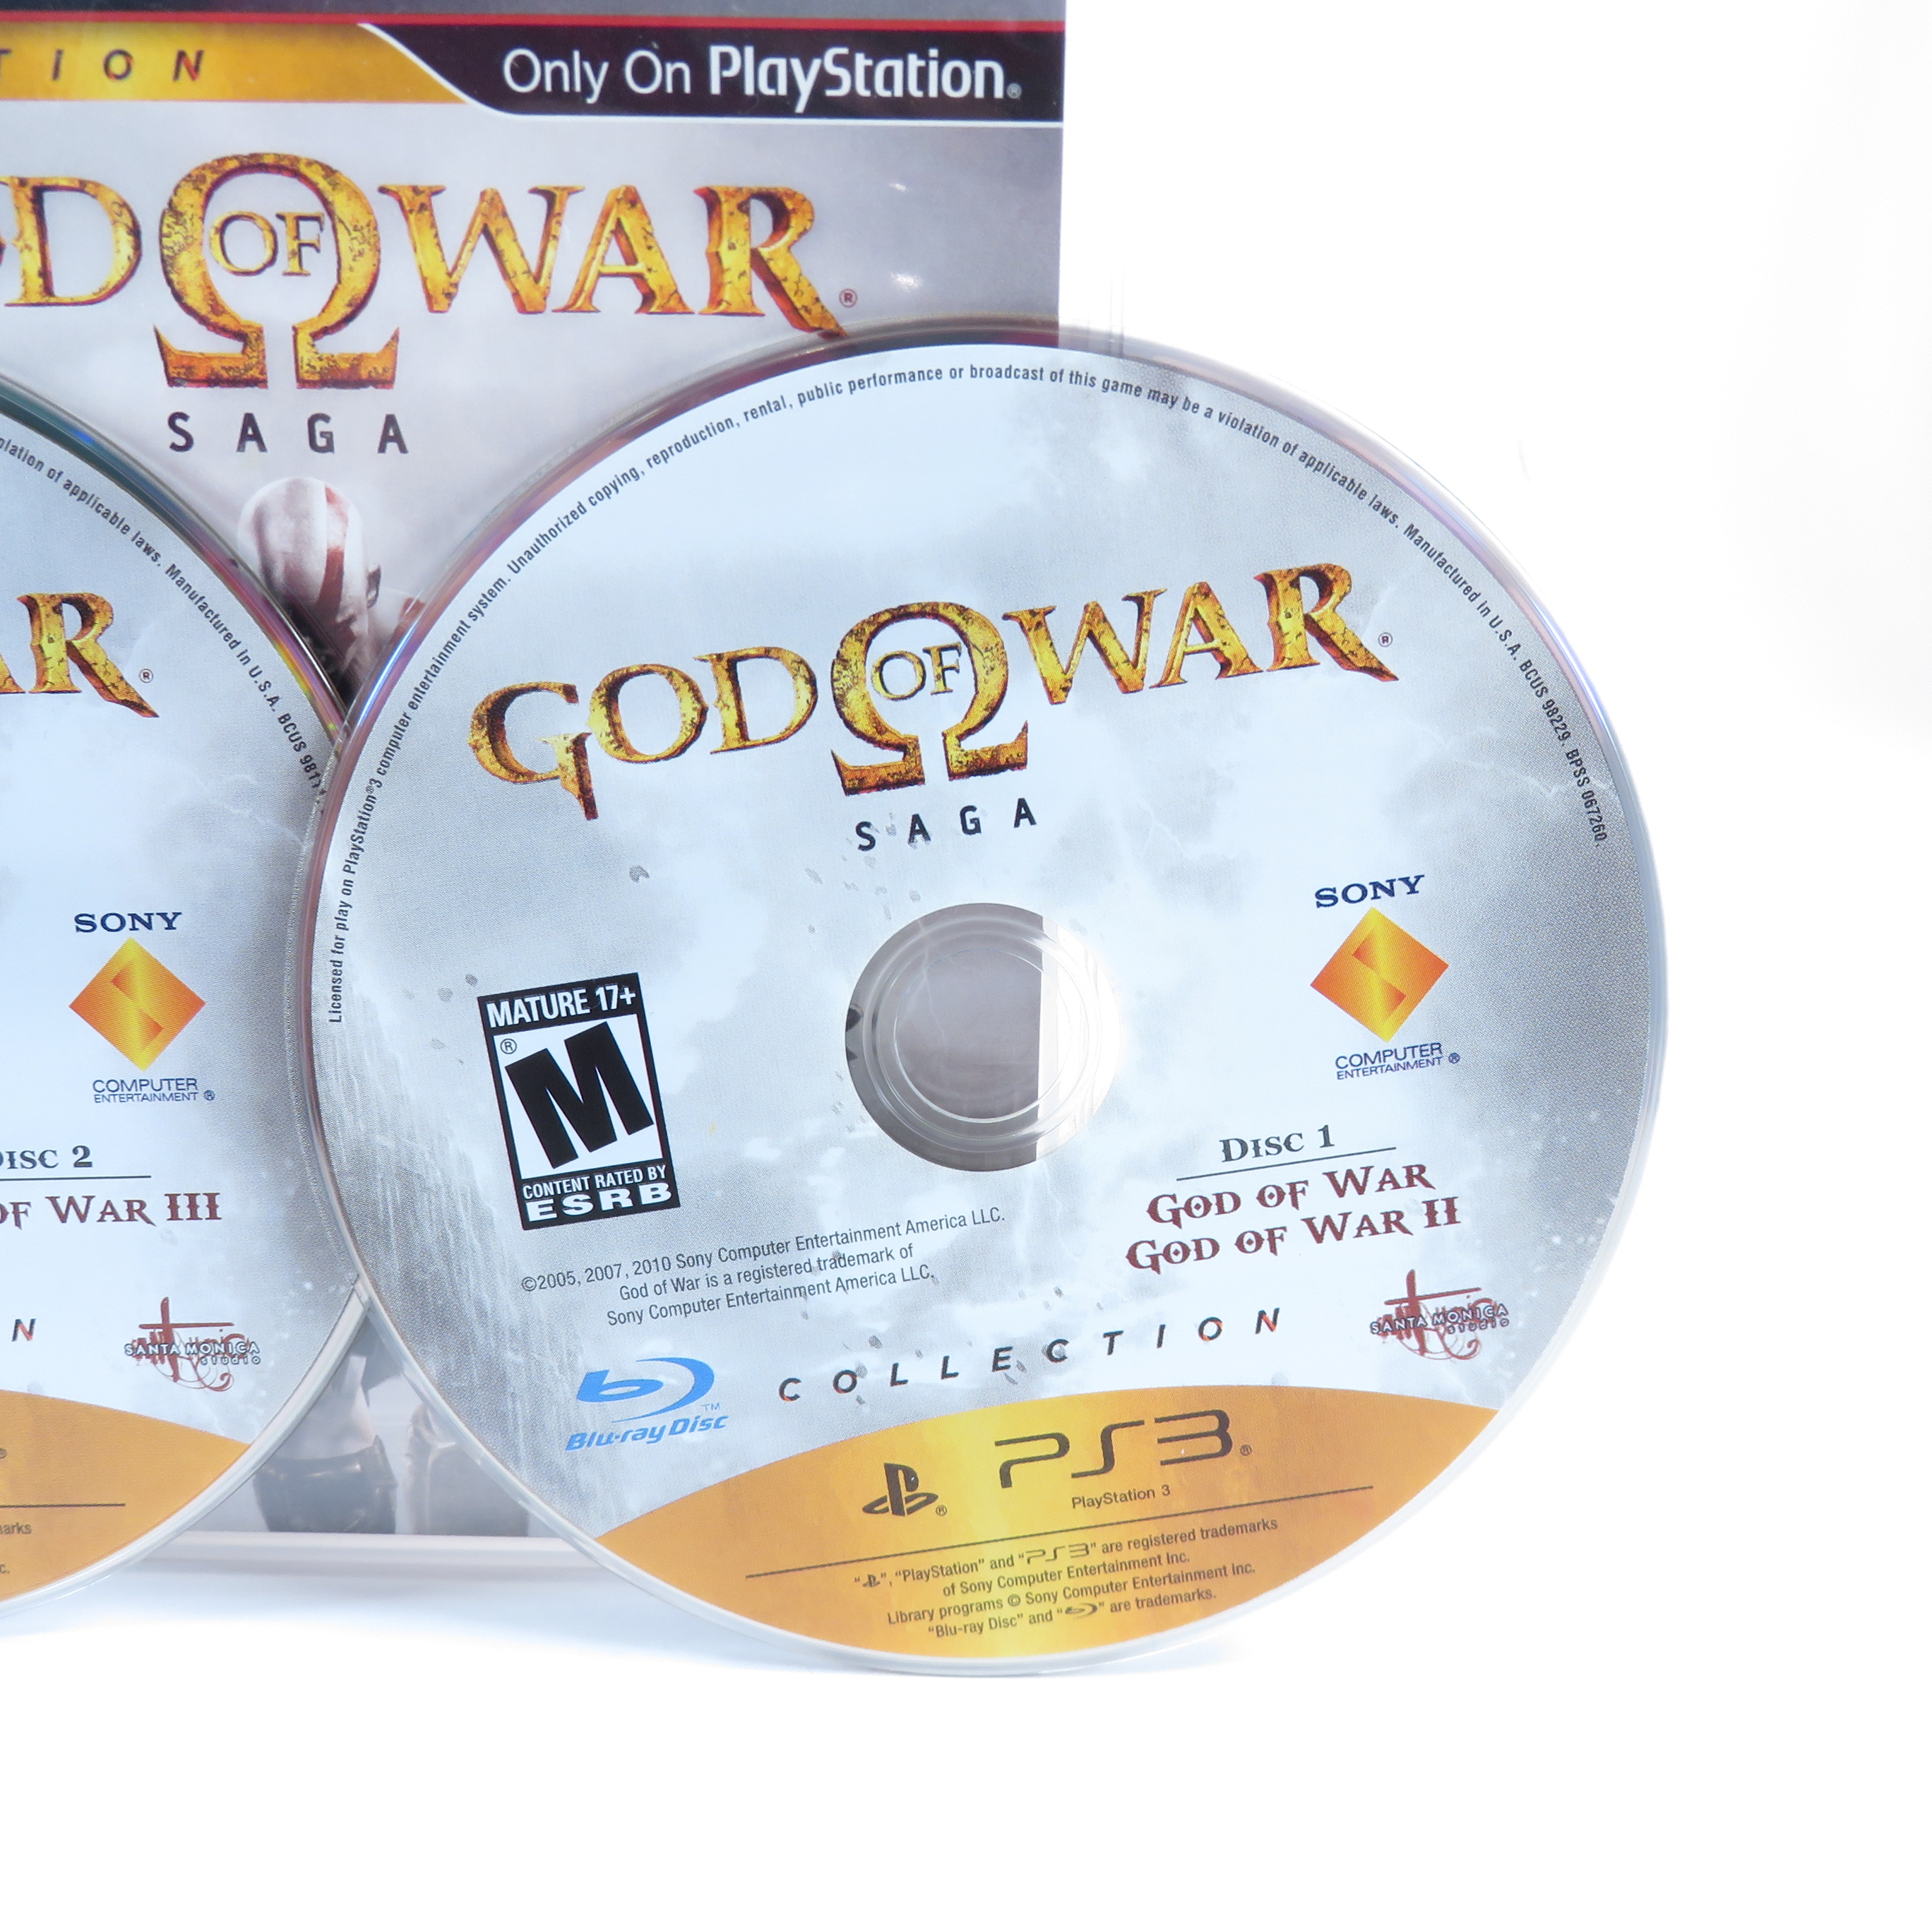 God Of War Saga Video Game for the Sony PlayStation 3